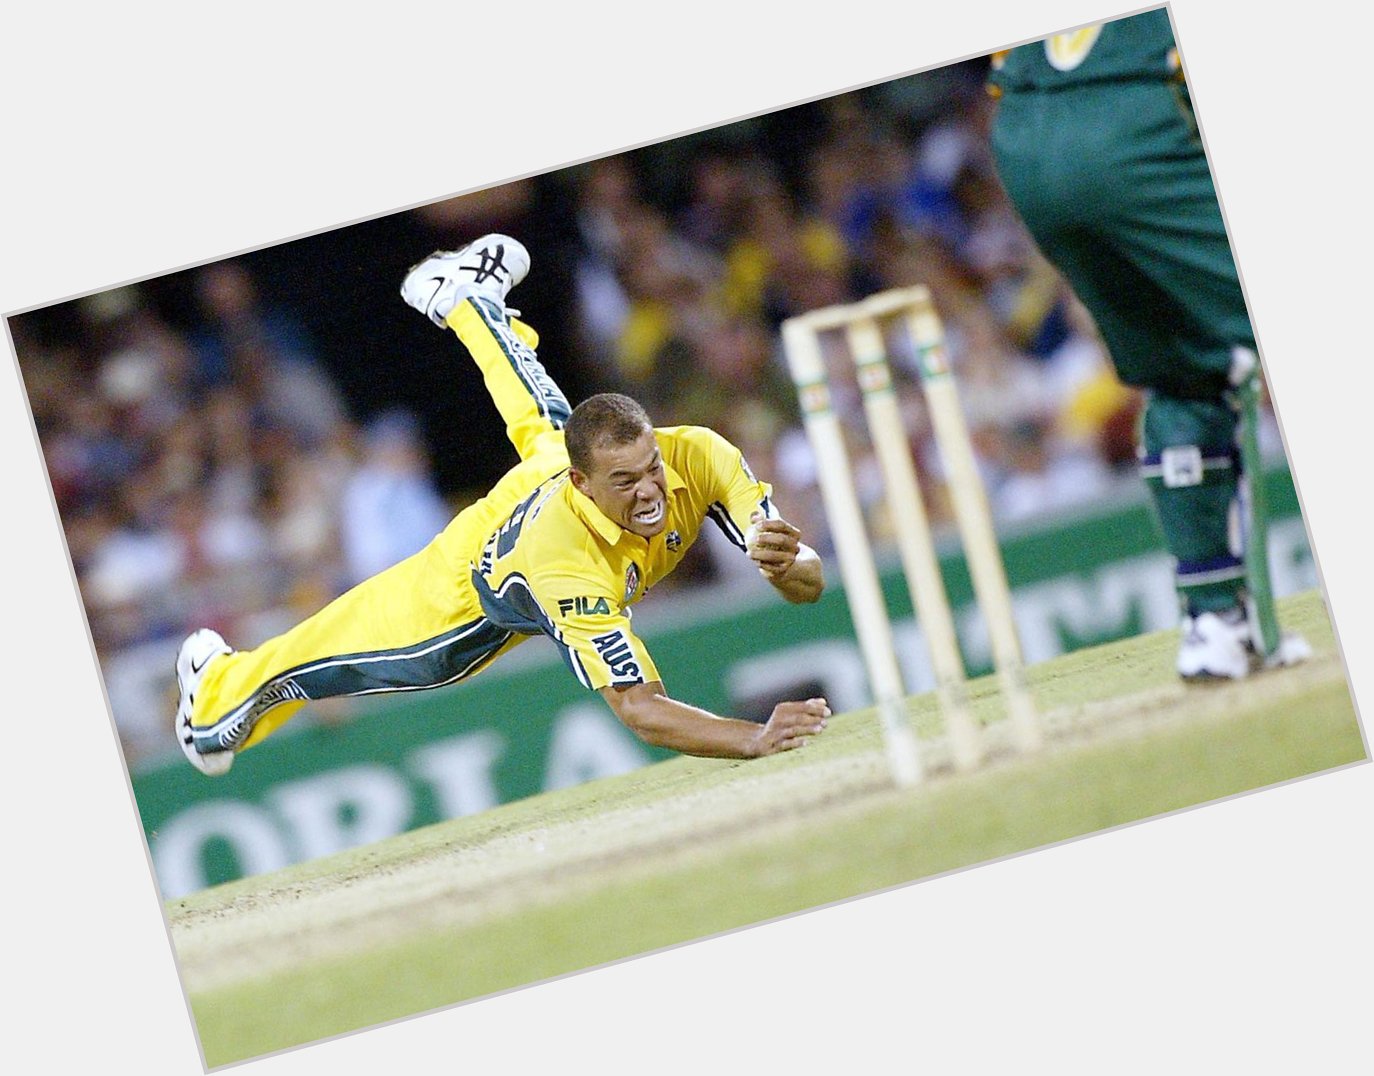 A very happy birthday to Andrew Symonds, one of the greatest all-rounders in Australian cricket    